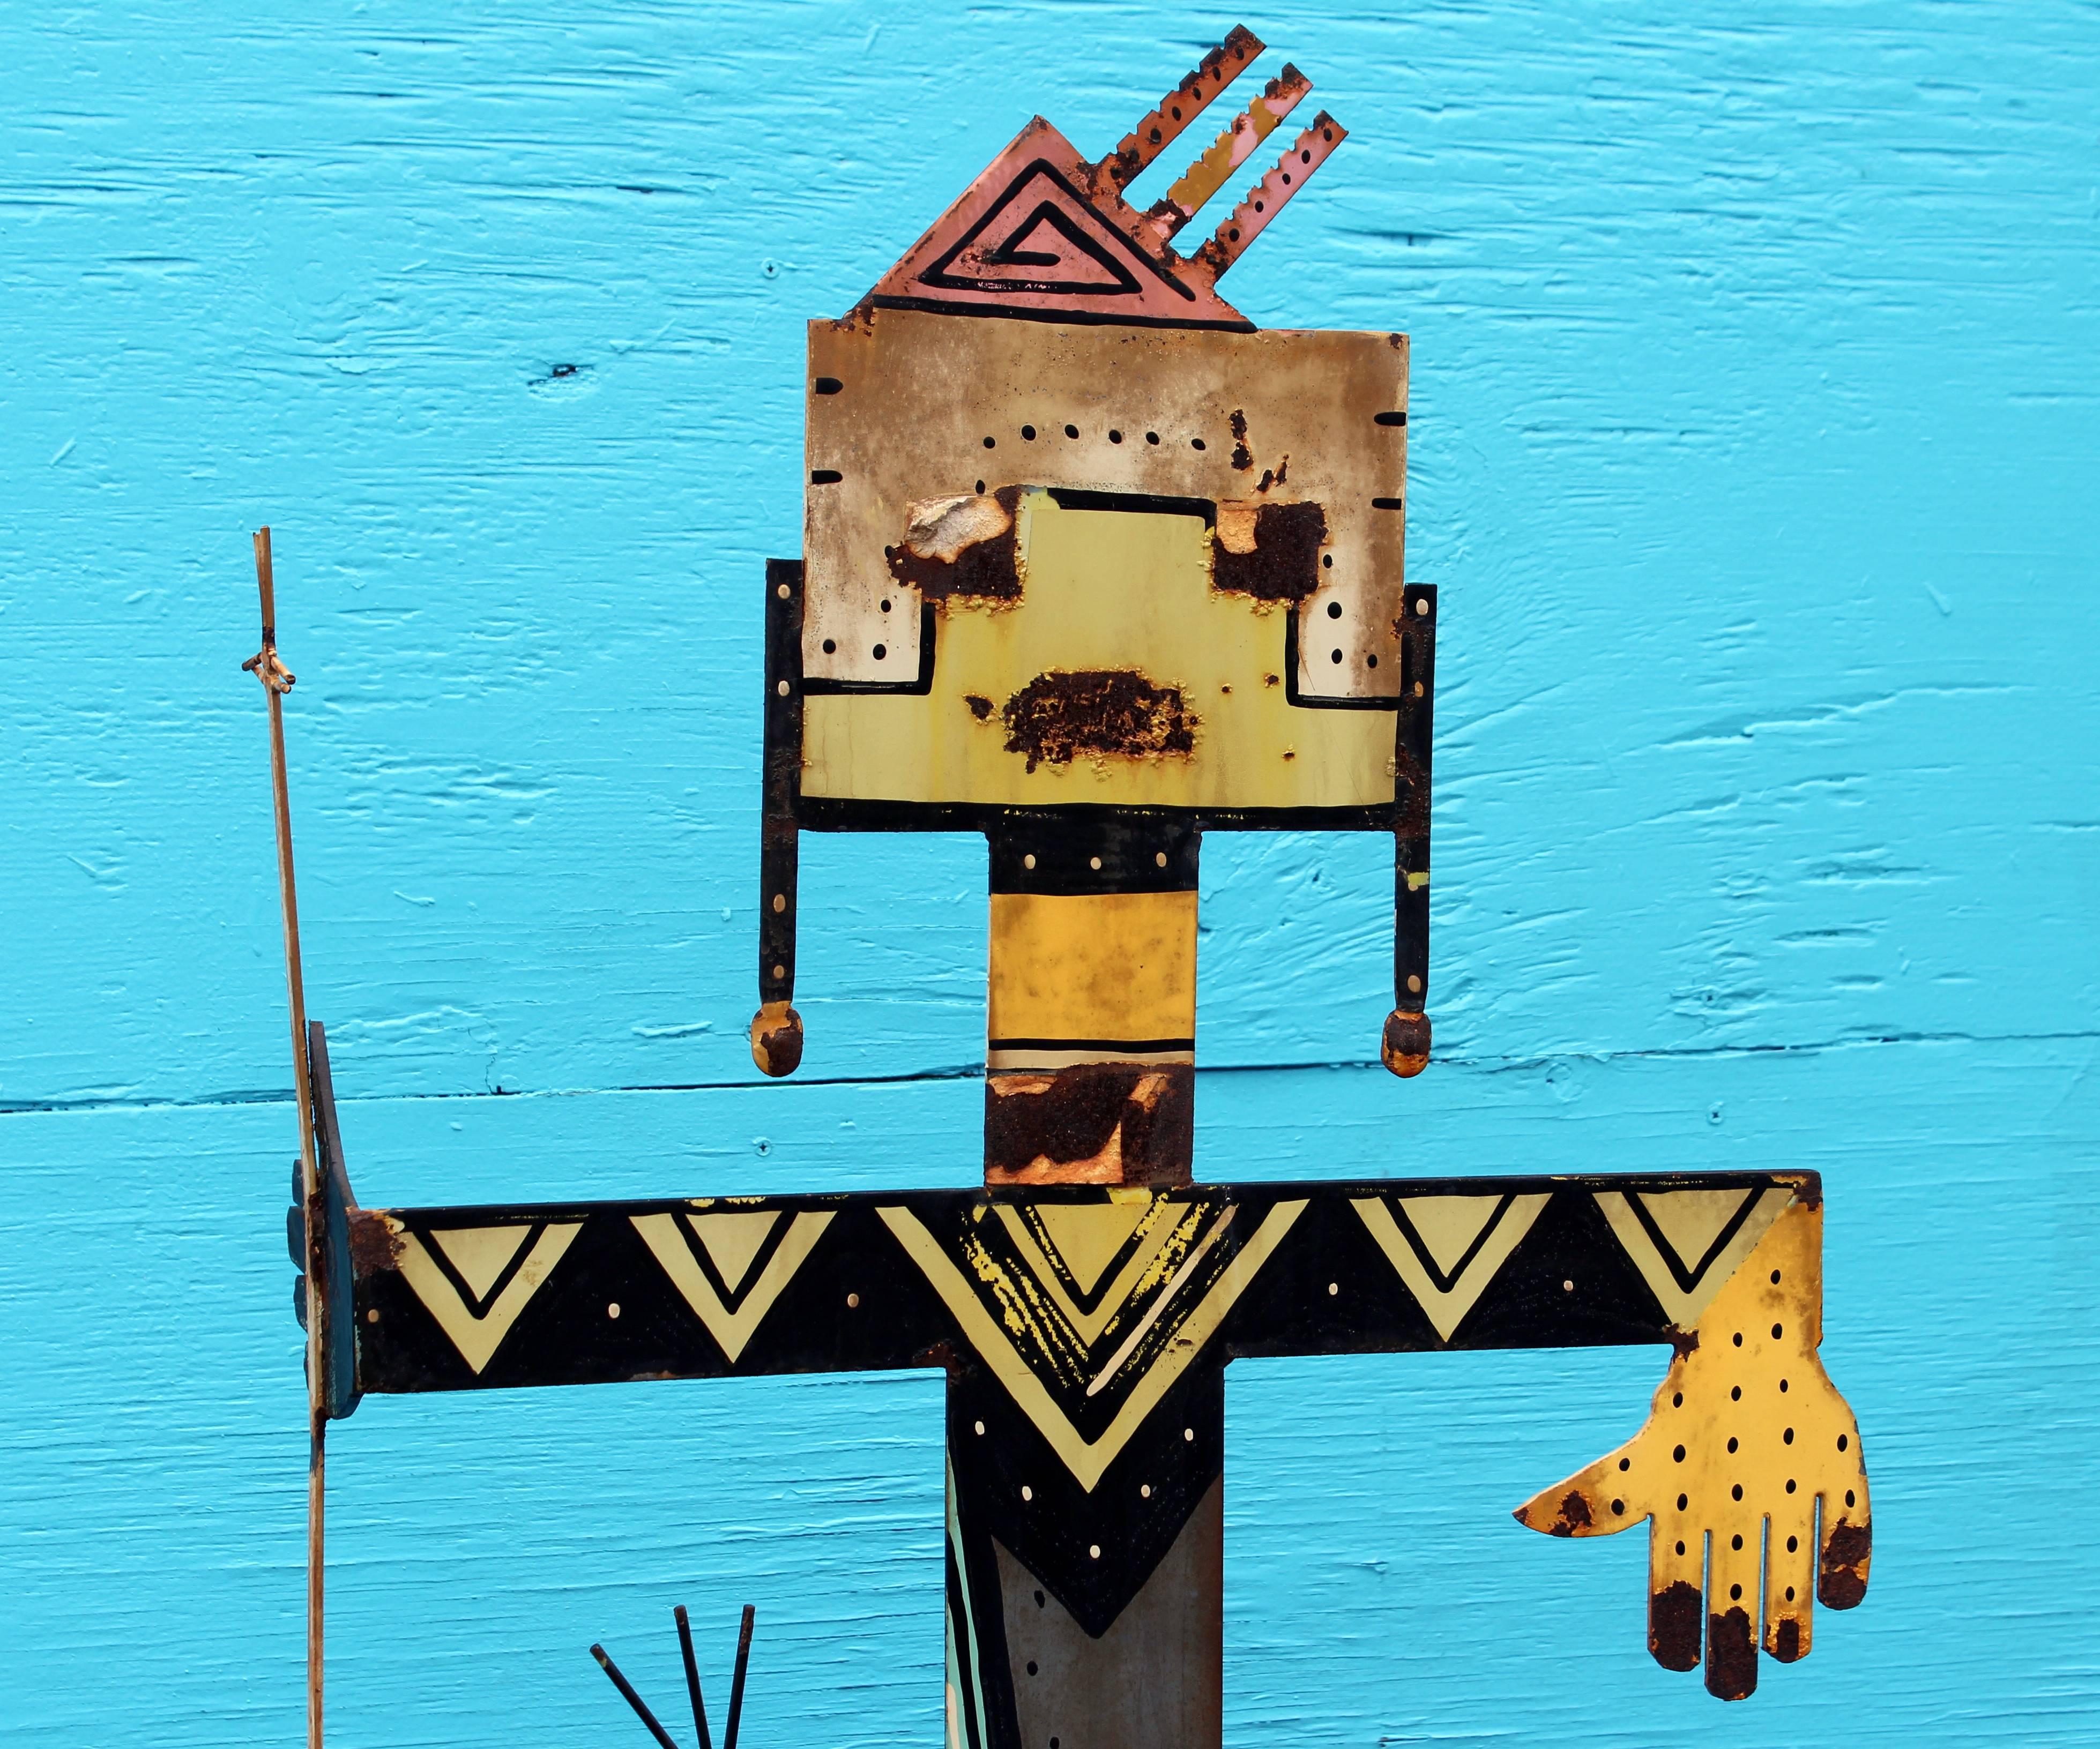 Vintage painted steel sculpture of a Hopi style shamanistic standing figure, circa late 20th century. Depicted standing on a heavy base with two pairs of hands and holding ritual implements and painted on both sides in geometric decor. Lively piece